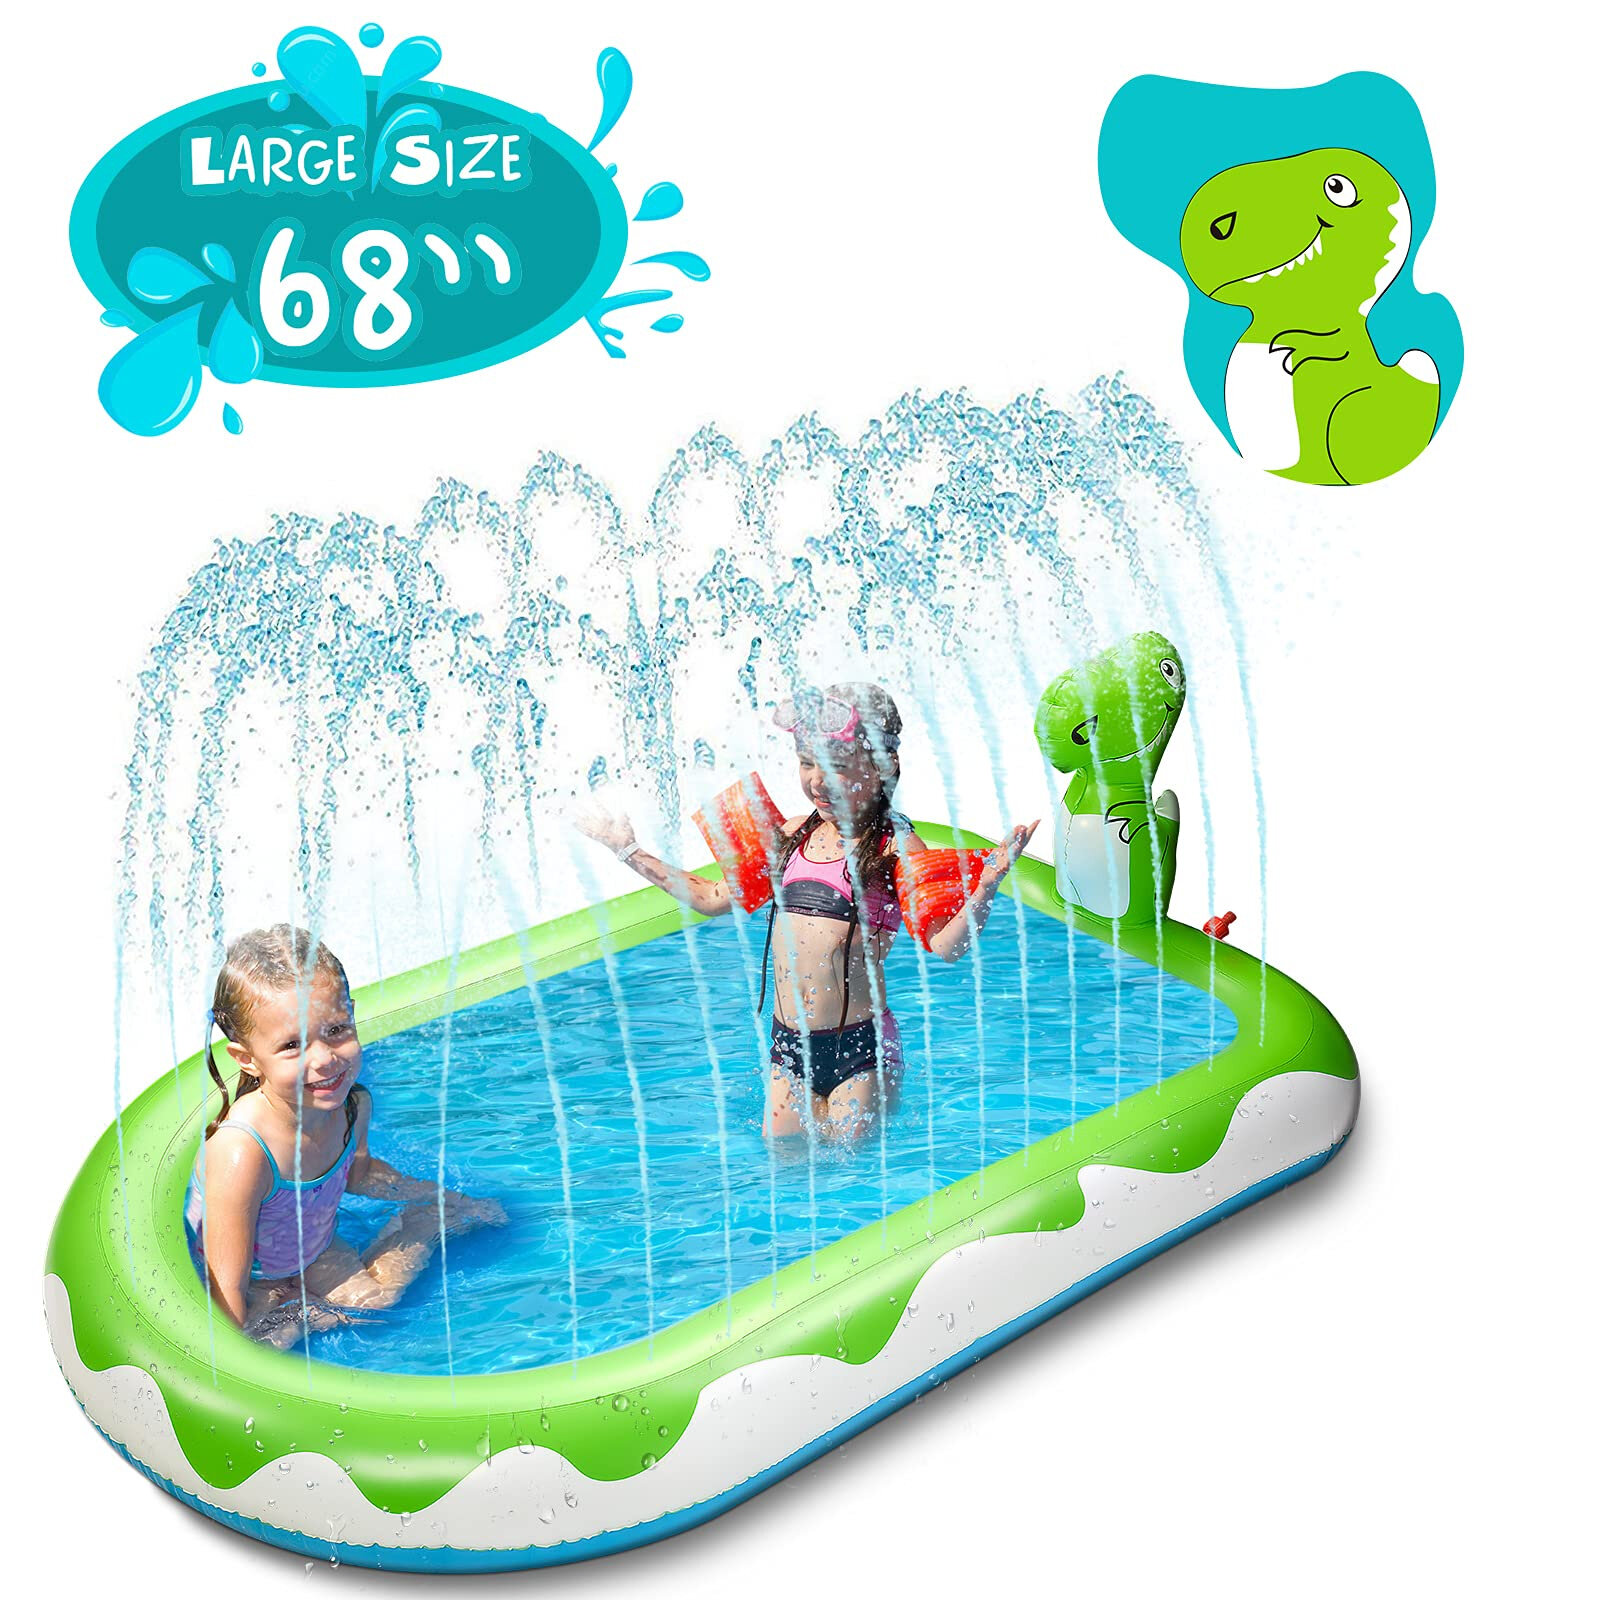 Outdoor Inflatable Water Spray Sprinkler Play Mat 2 sizes 